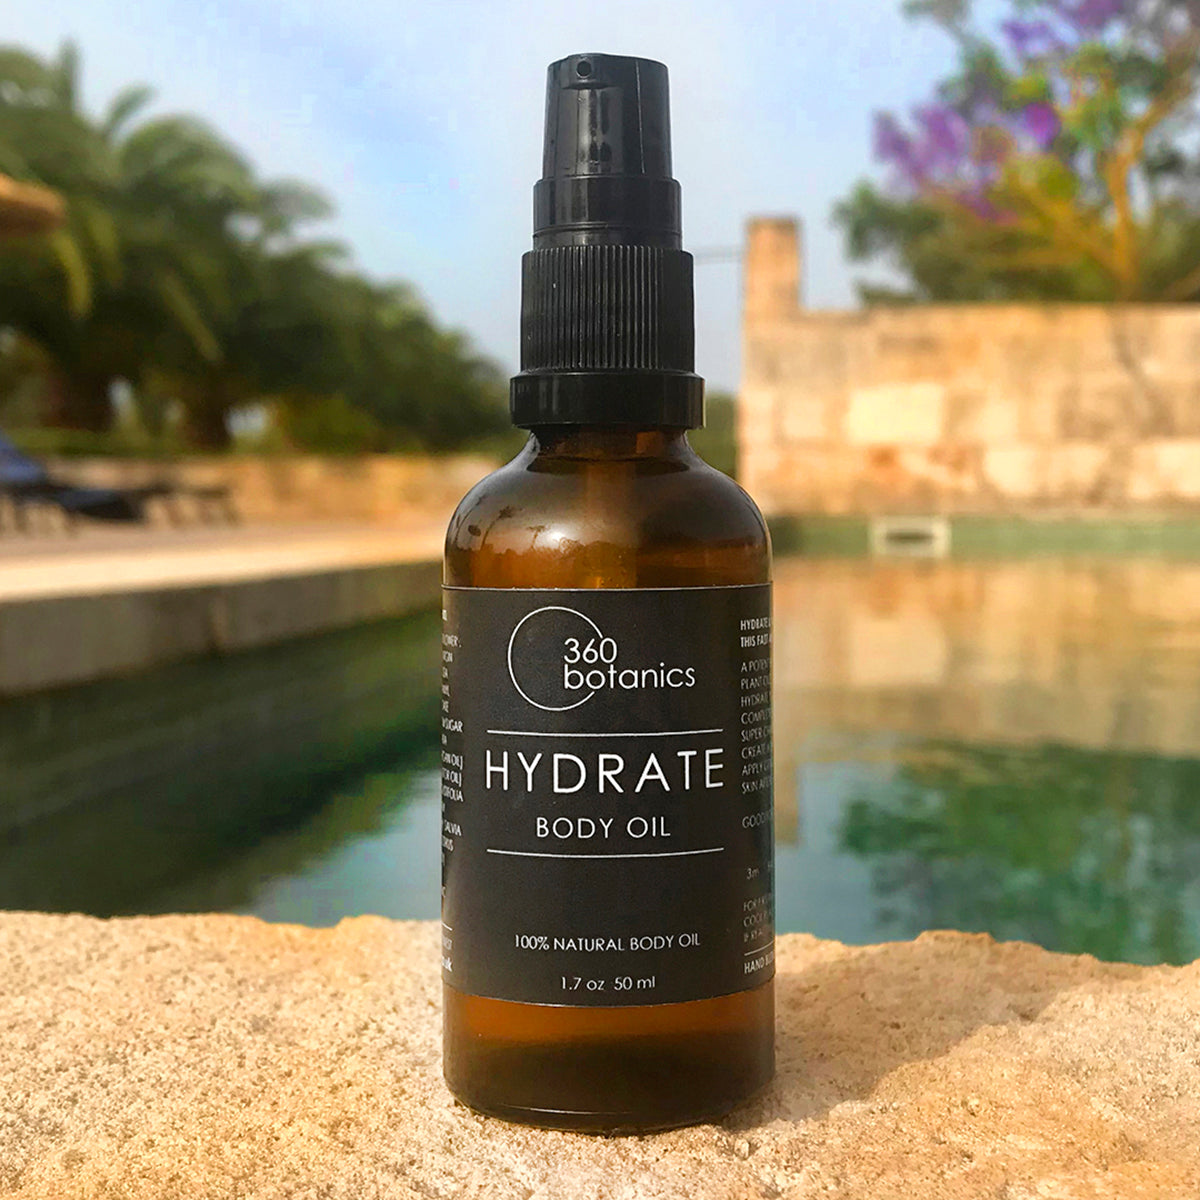 A bottle of "360 Botanics HYDRATE Body Oil" with a black label, positioned on a stone surface with a blurred background featuring a swimming pool and palm trees.